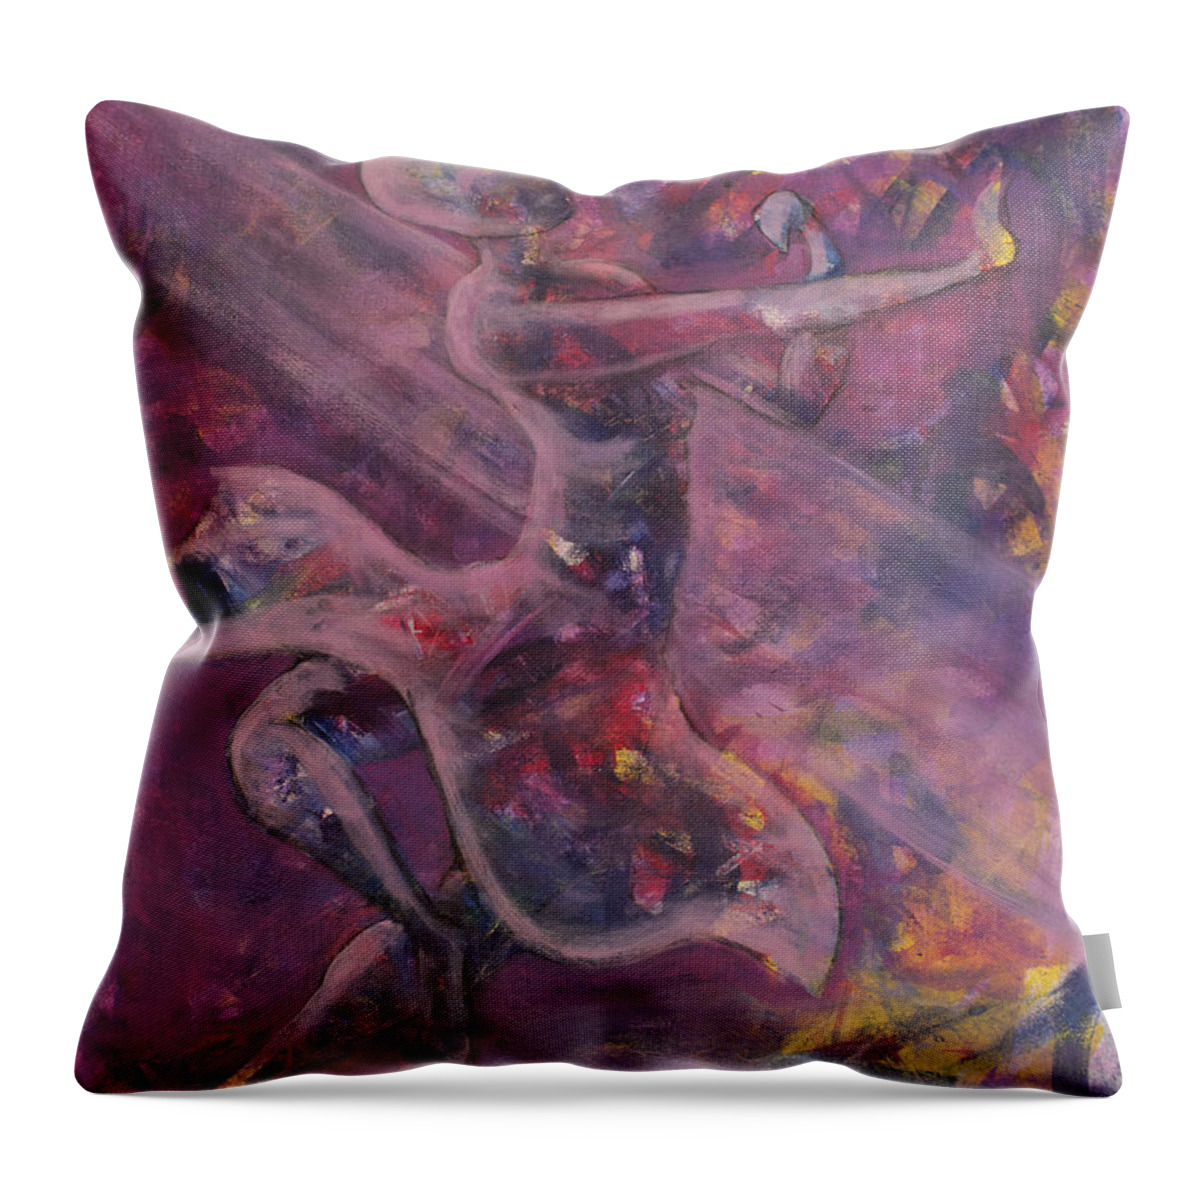 Dancer Throw Pillow featuring the painting Dancer by Jack Malloch